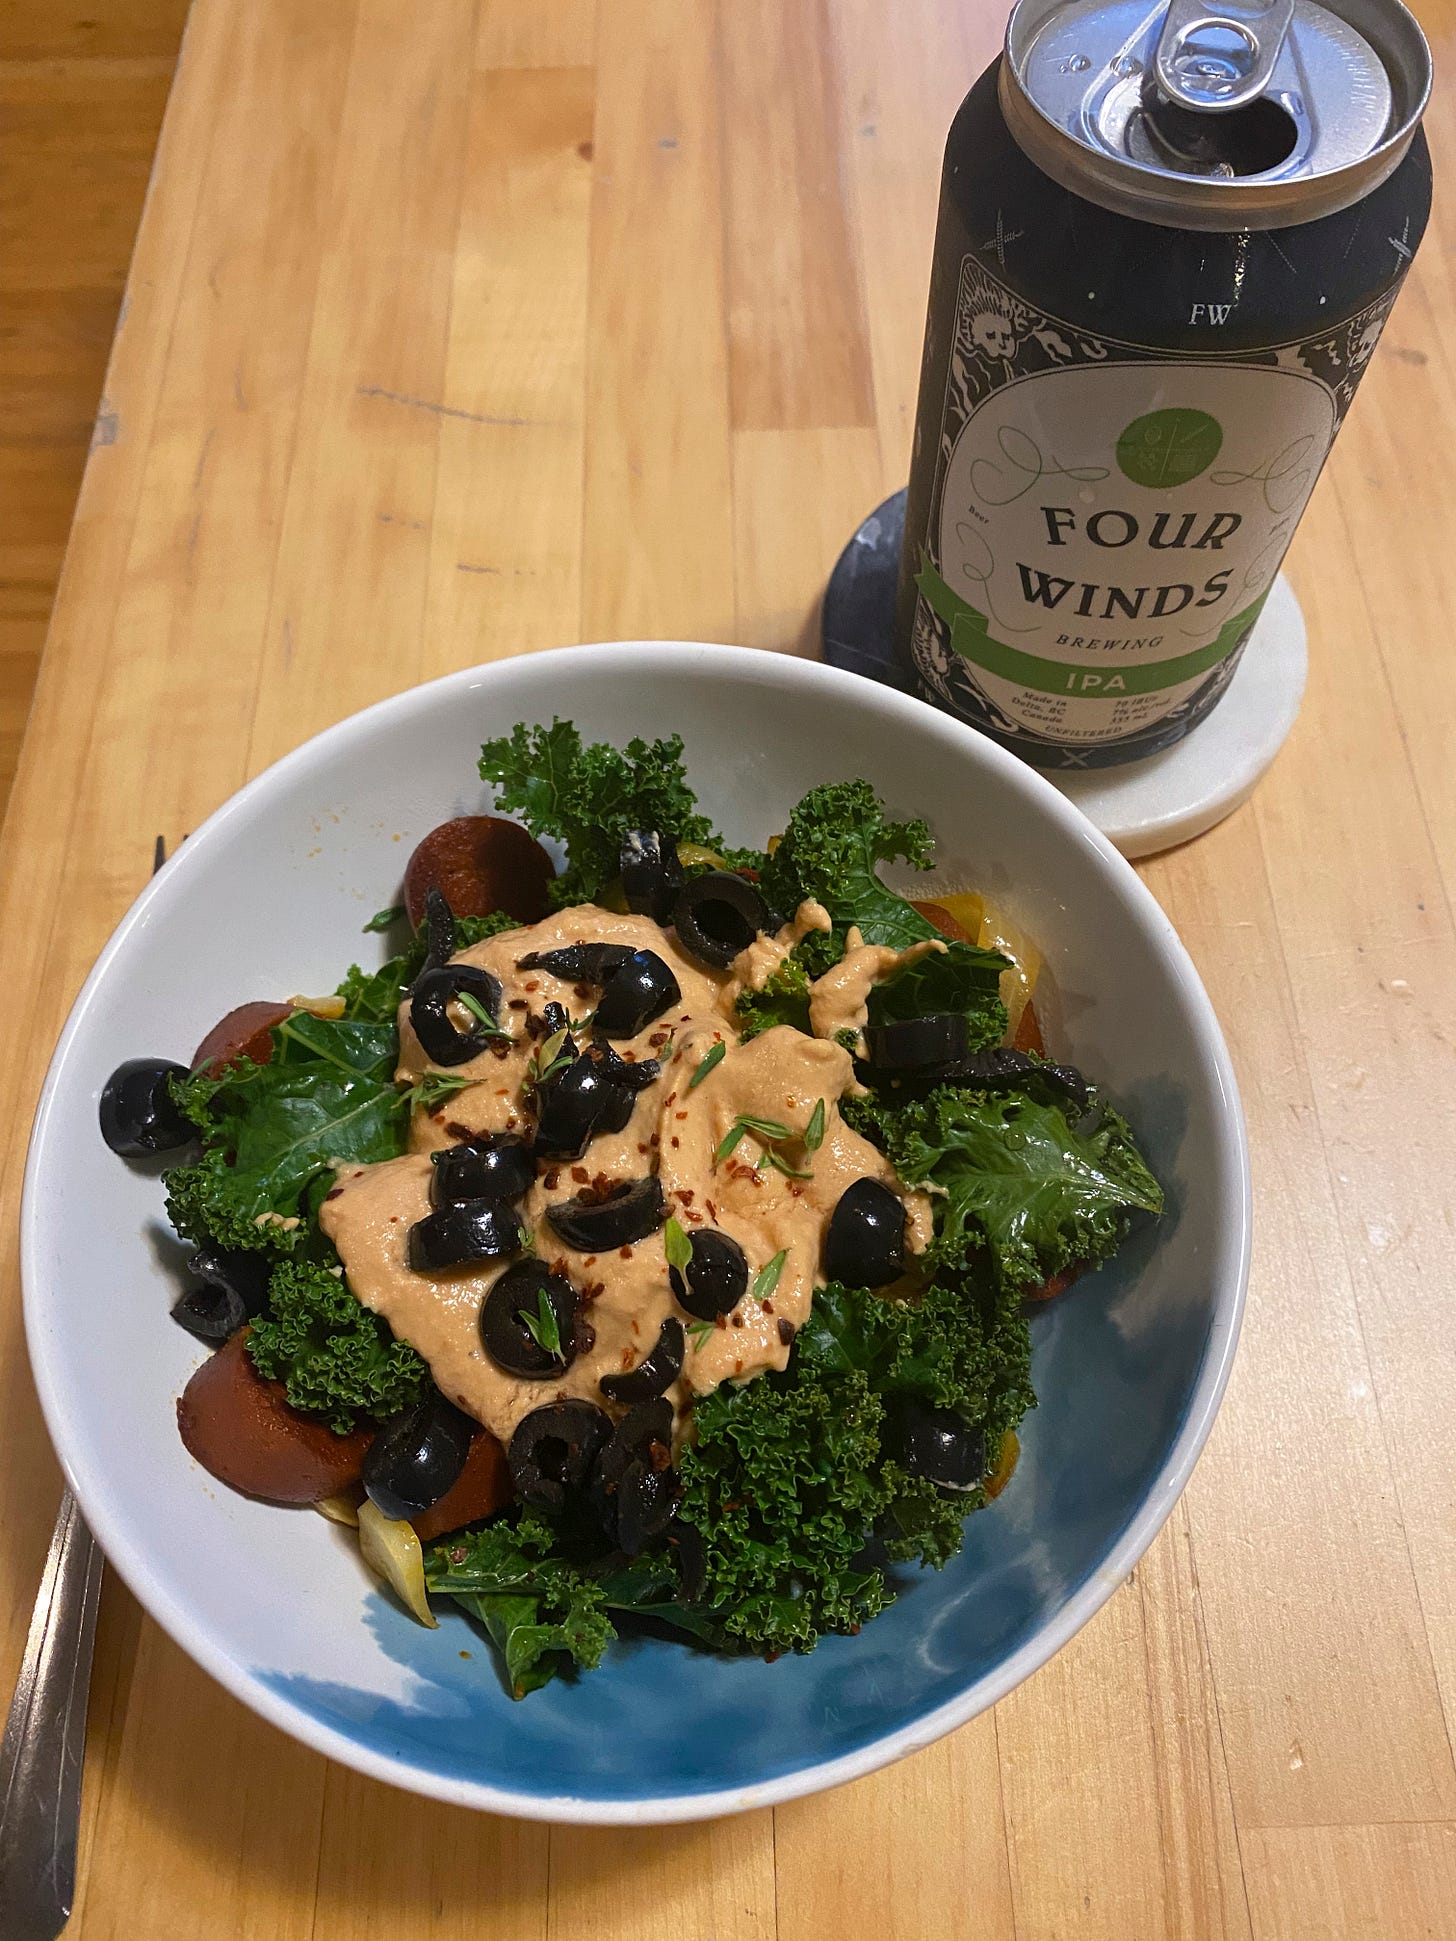 A white bowl full of rice, kale, browned slices of sausage, black olives, and an orange-ish cheezy sauce with sprinkles of thyme and chili flakes on top. On a coaster near the bowl is a blue can of Four Winds IPA.